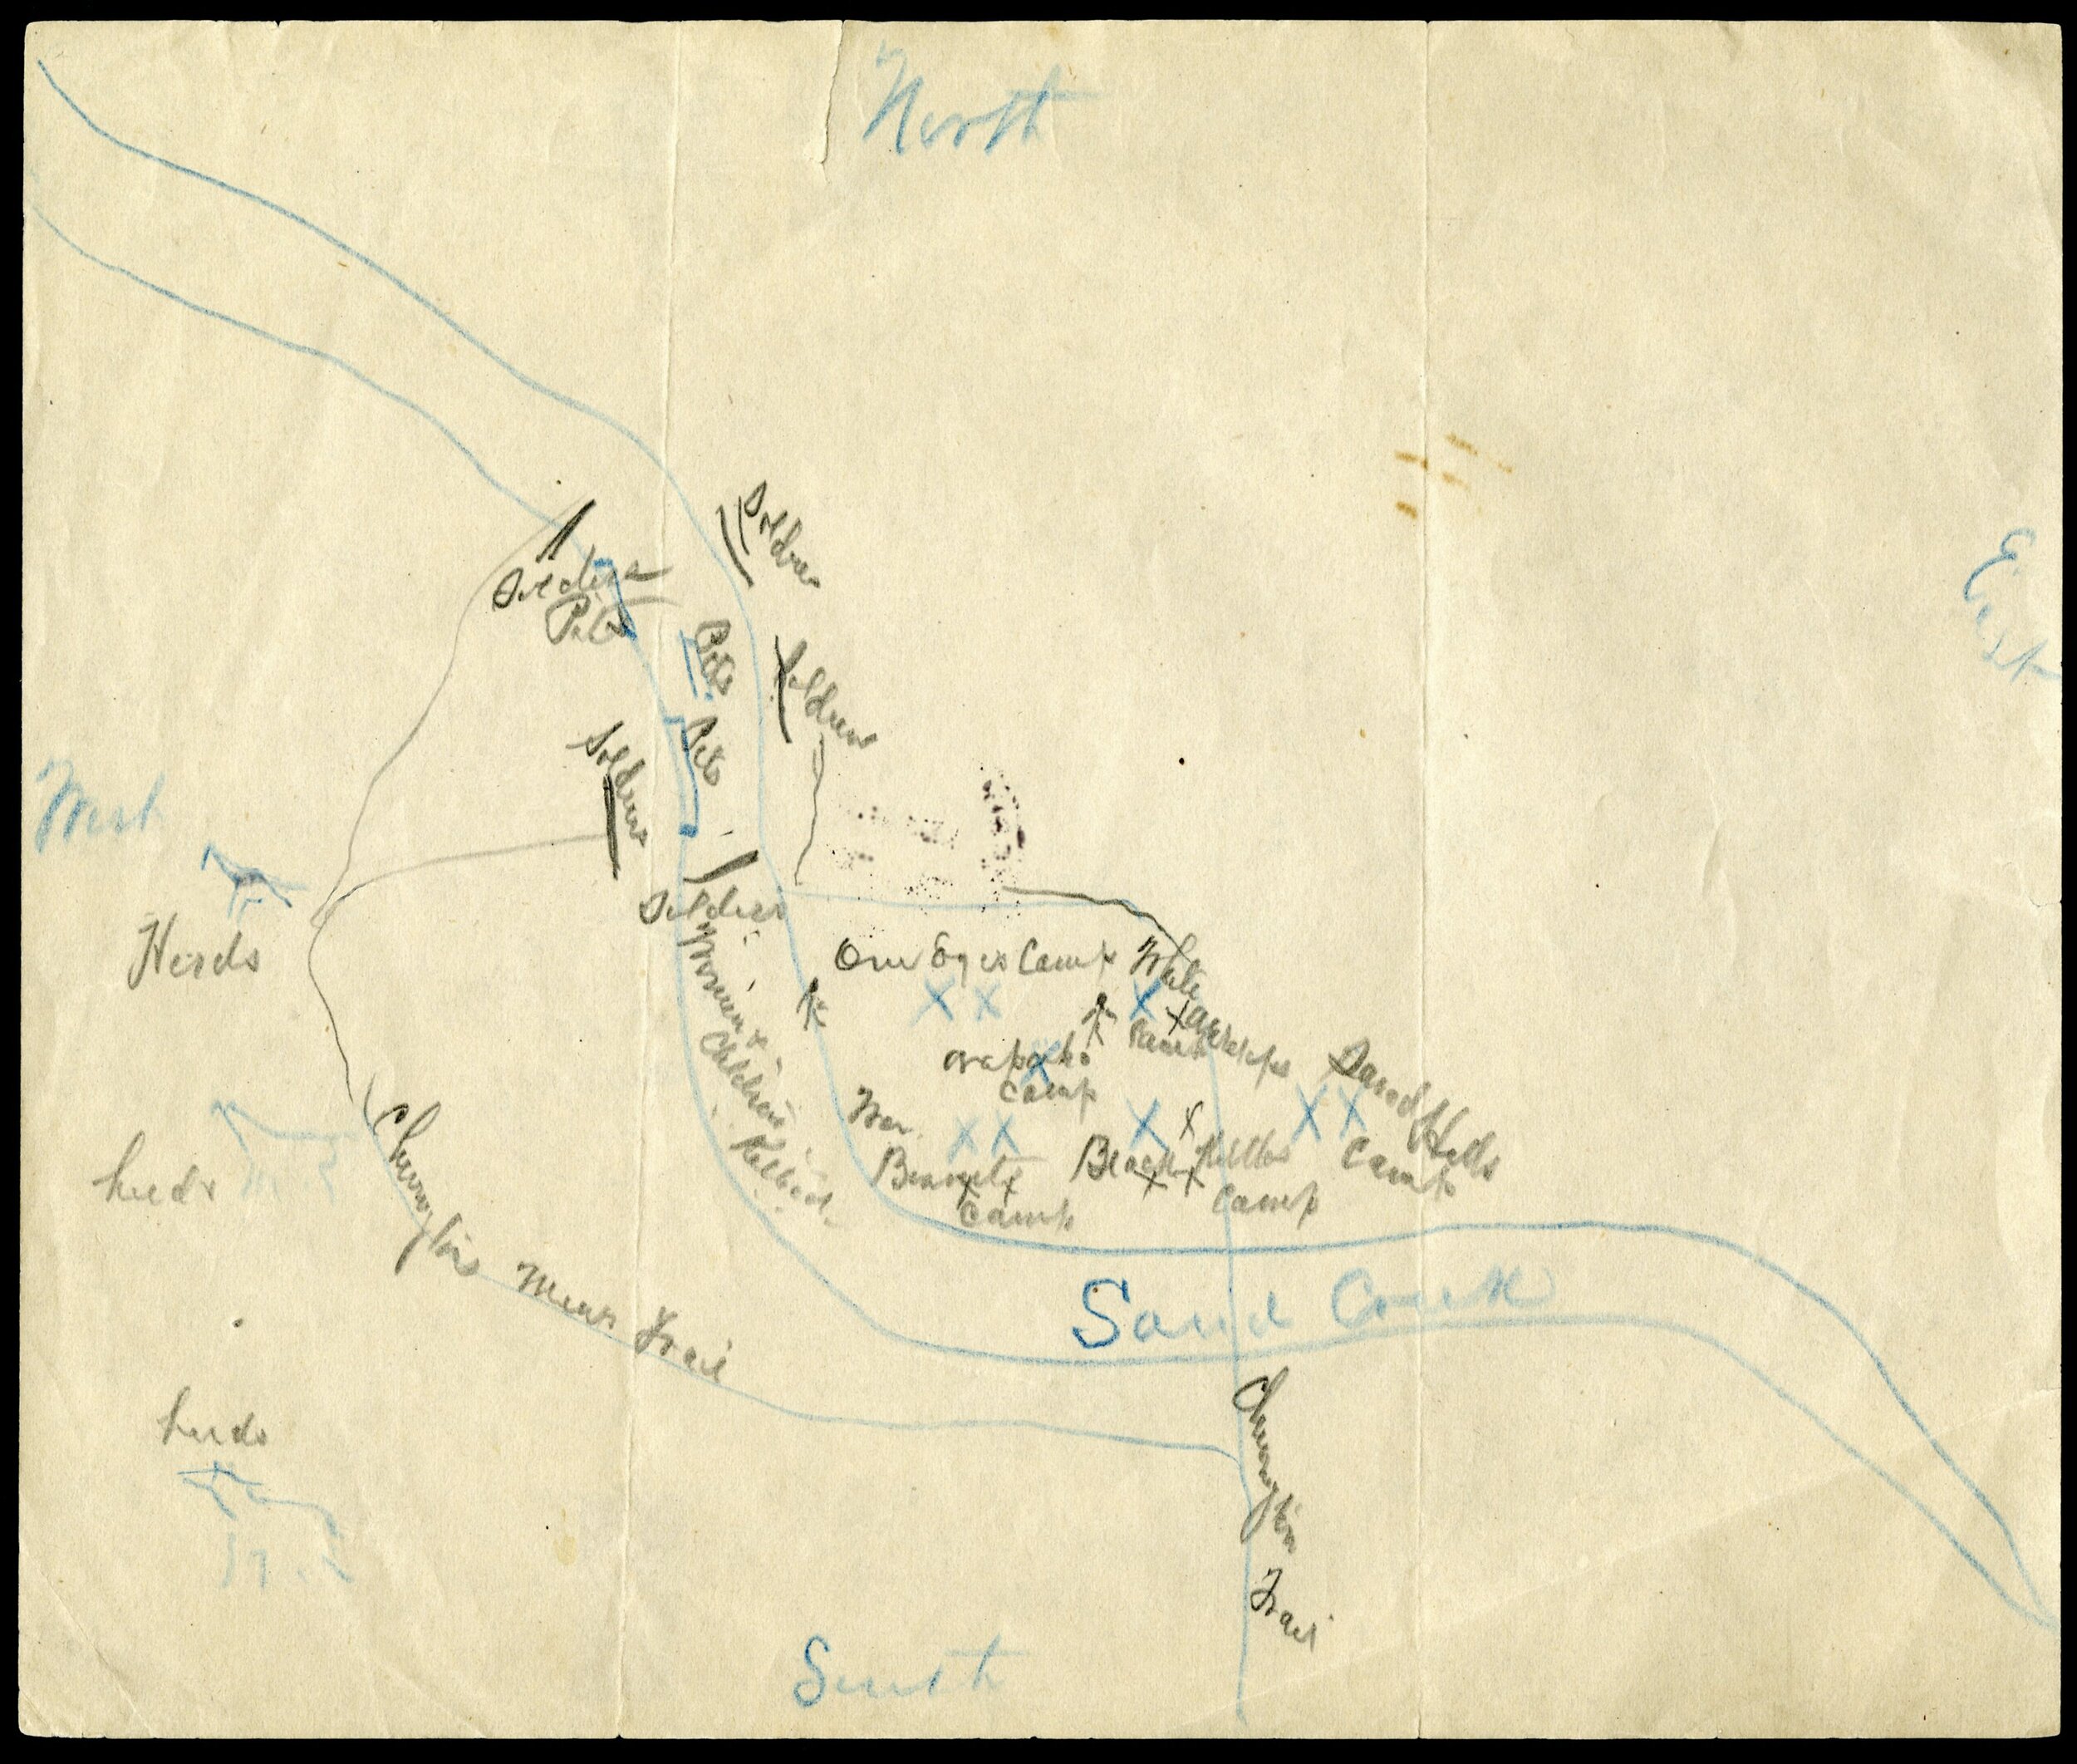 George Bent map of Arapahoe positions at Sand Creek